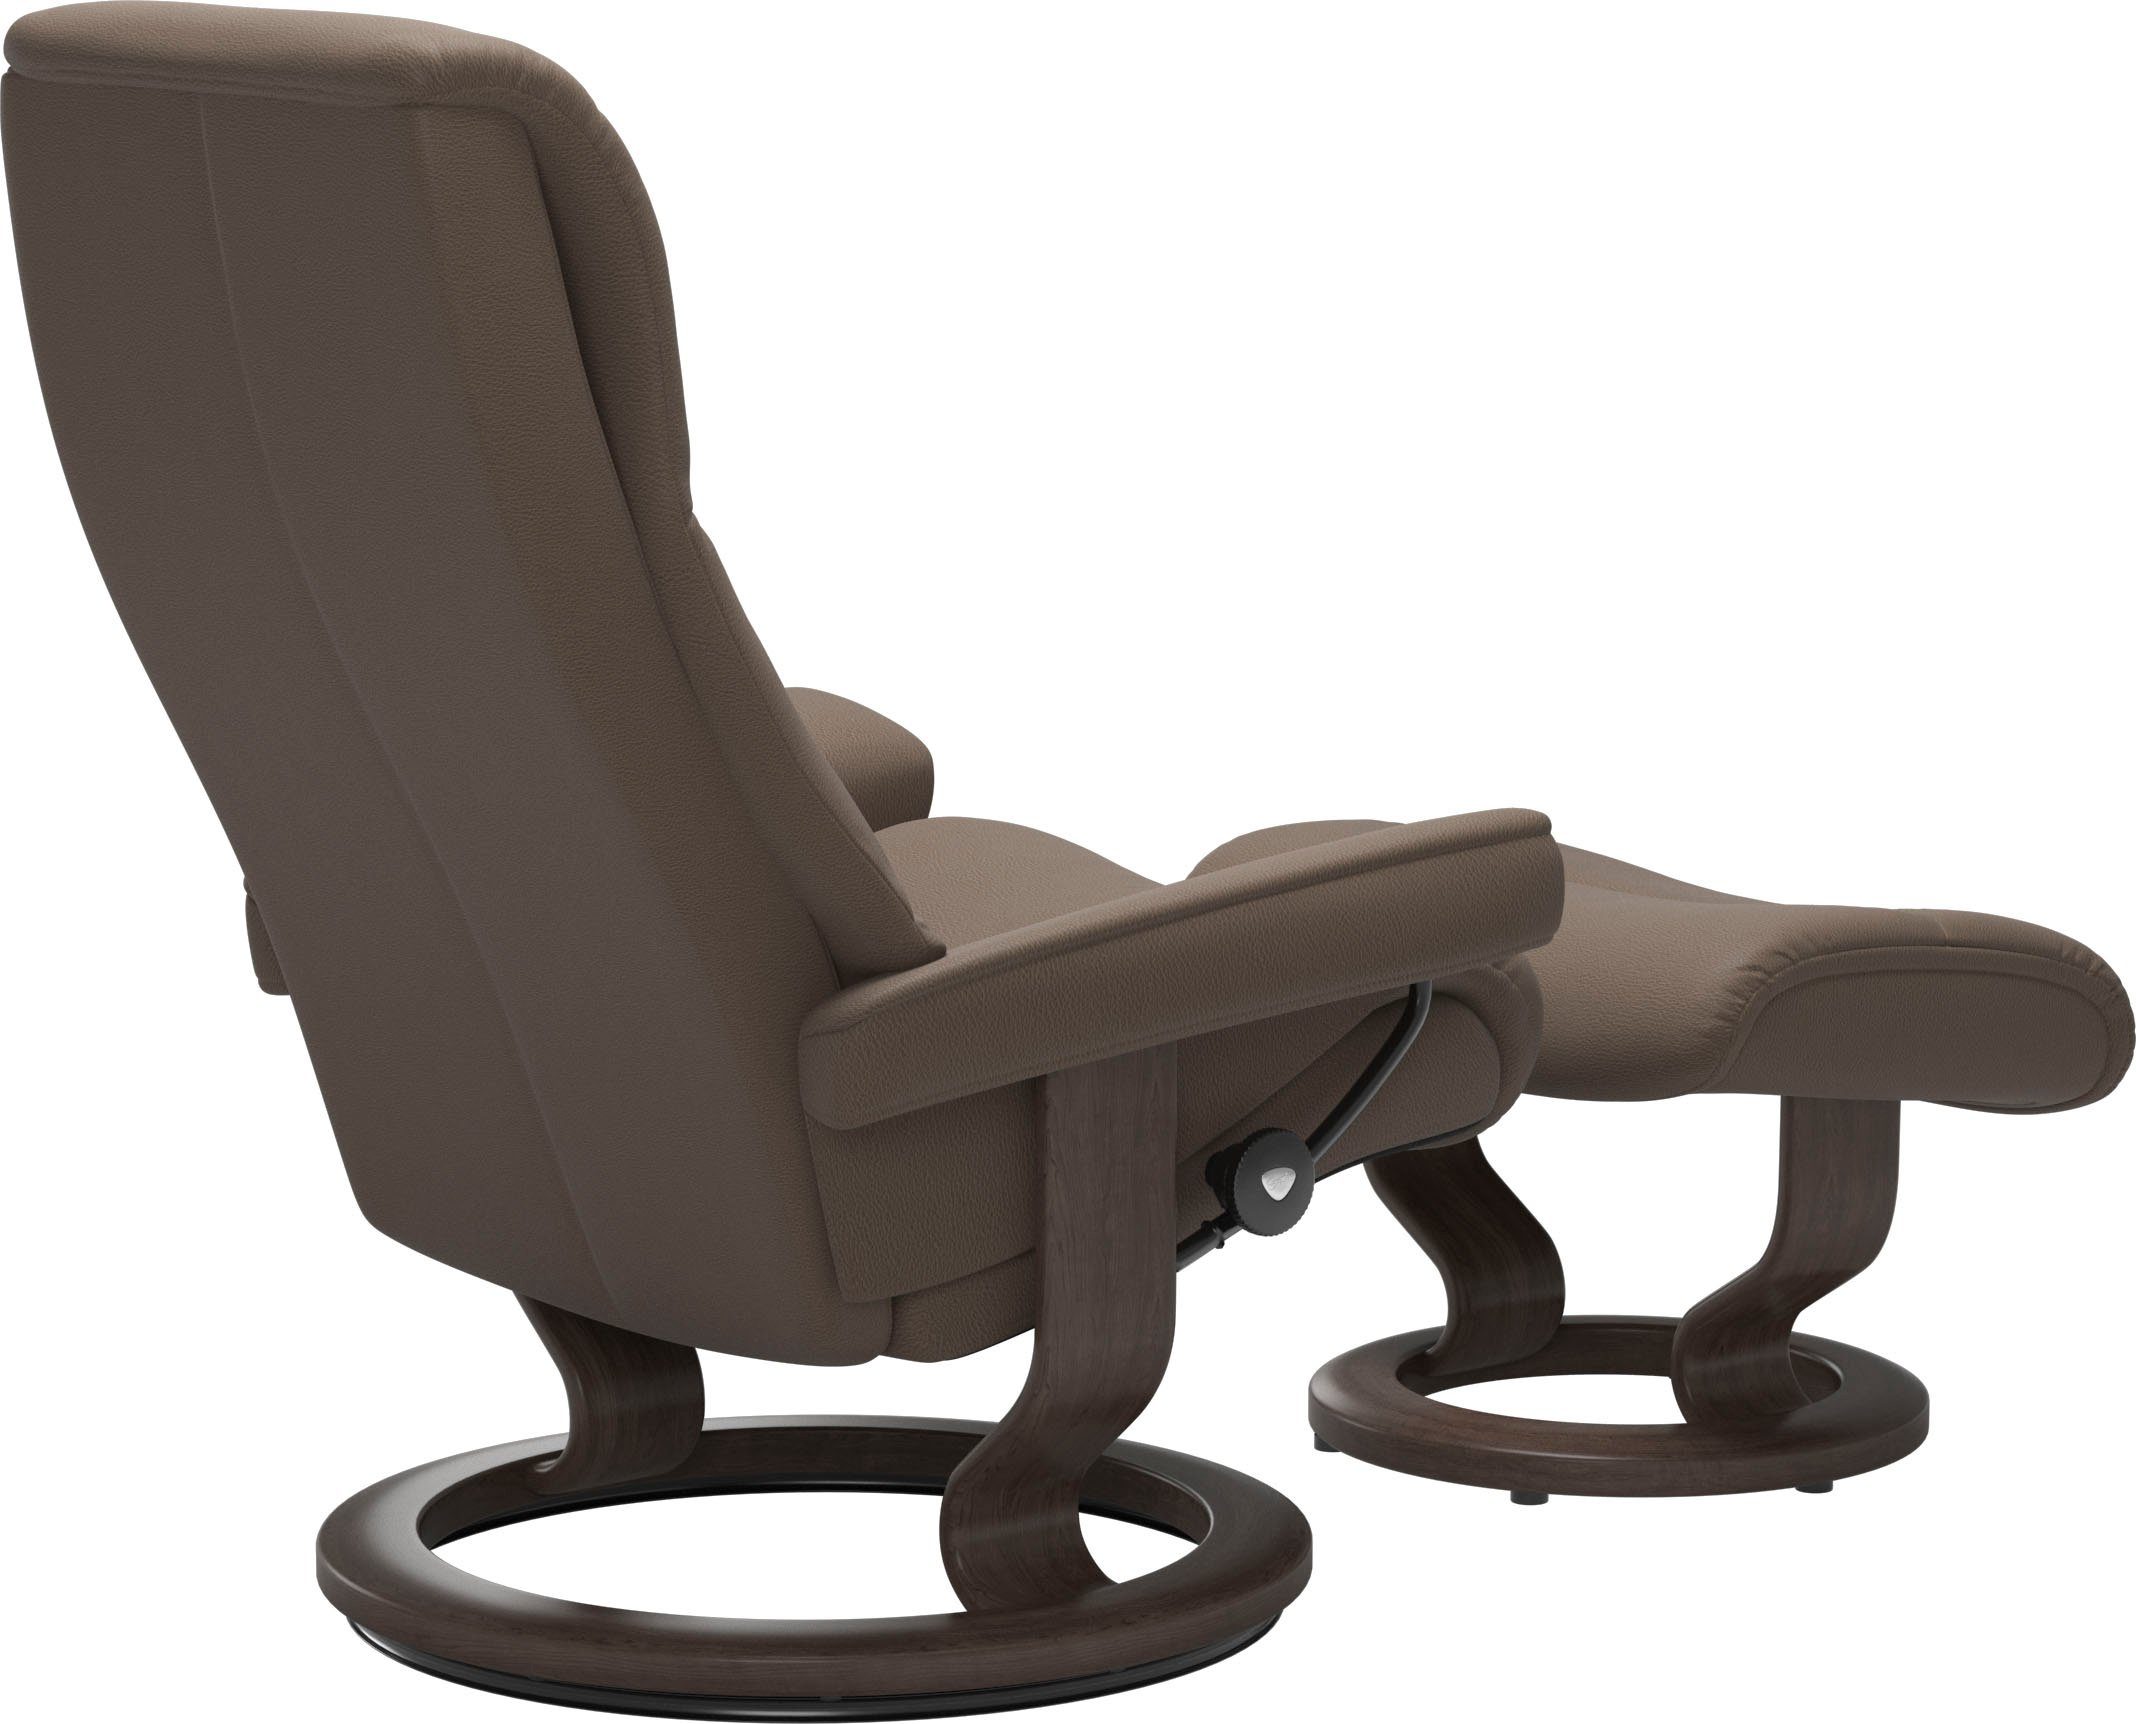 Stressless® Relaxsessel View, mit Base, Wenge Größe Classic S,Gestell